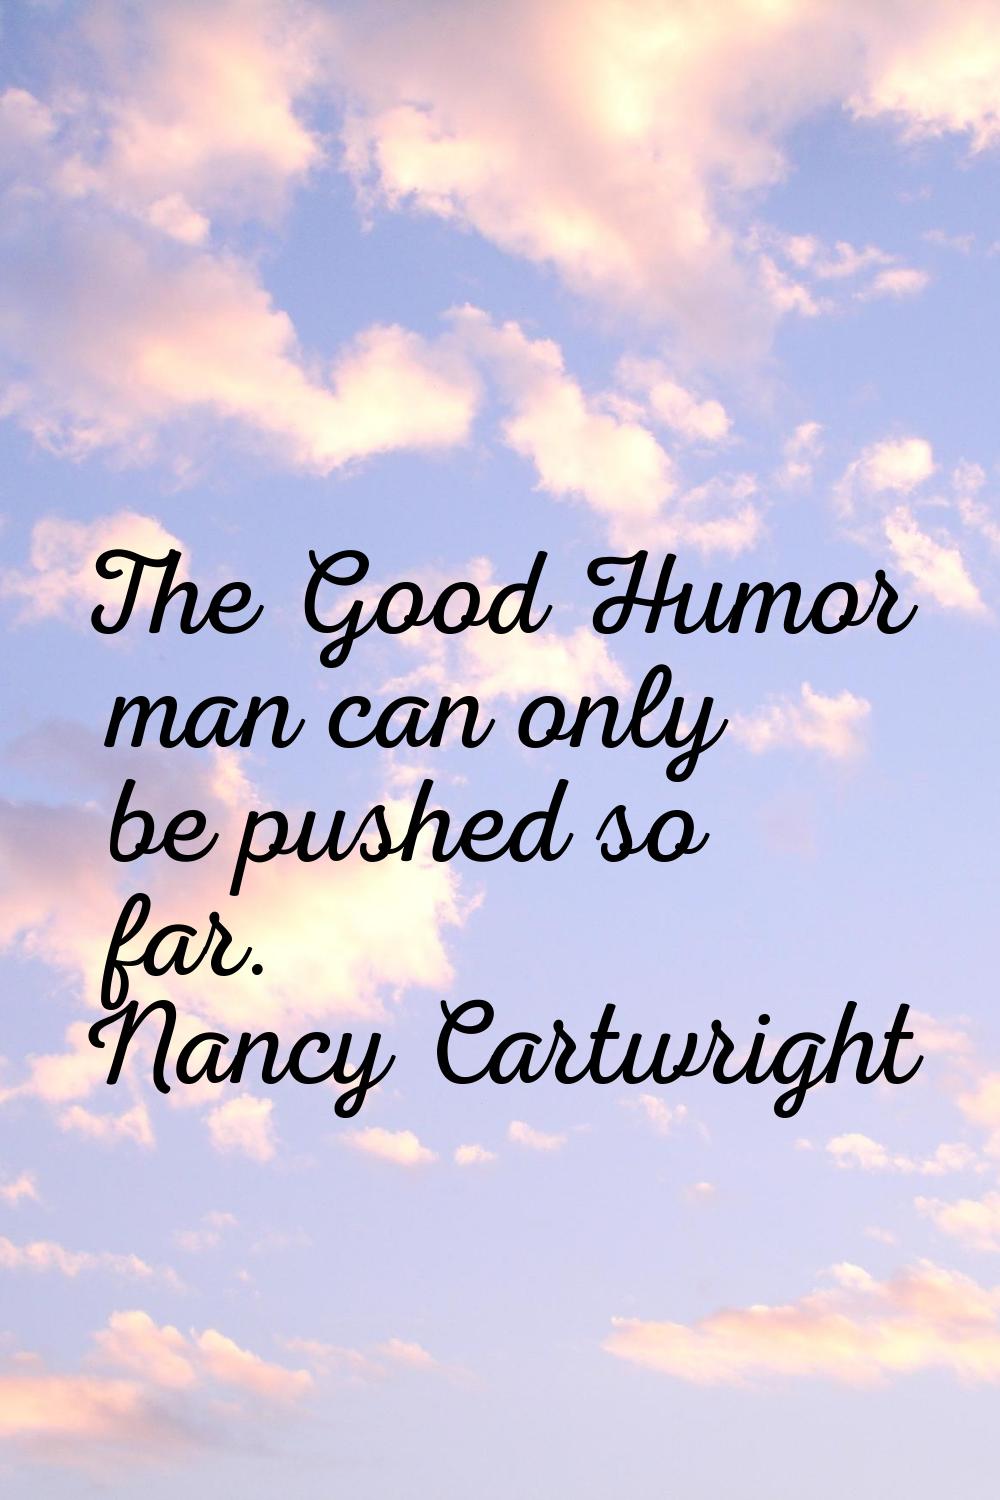 The Good Humor man can only be pushed so far.